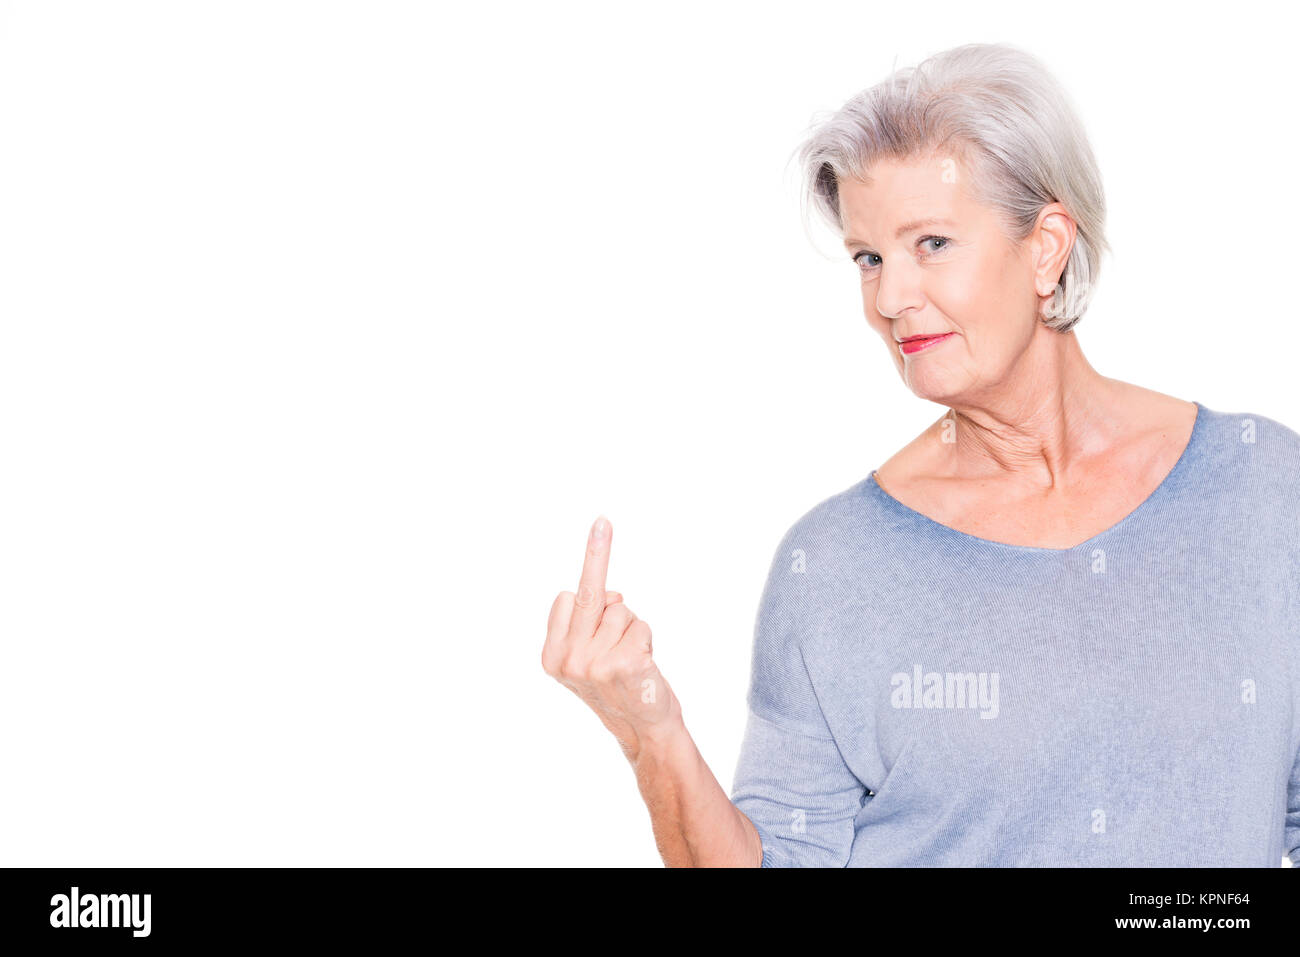 woman showing middle finger Stock Photo